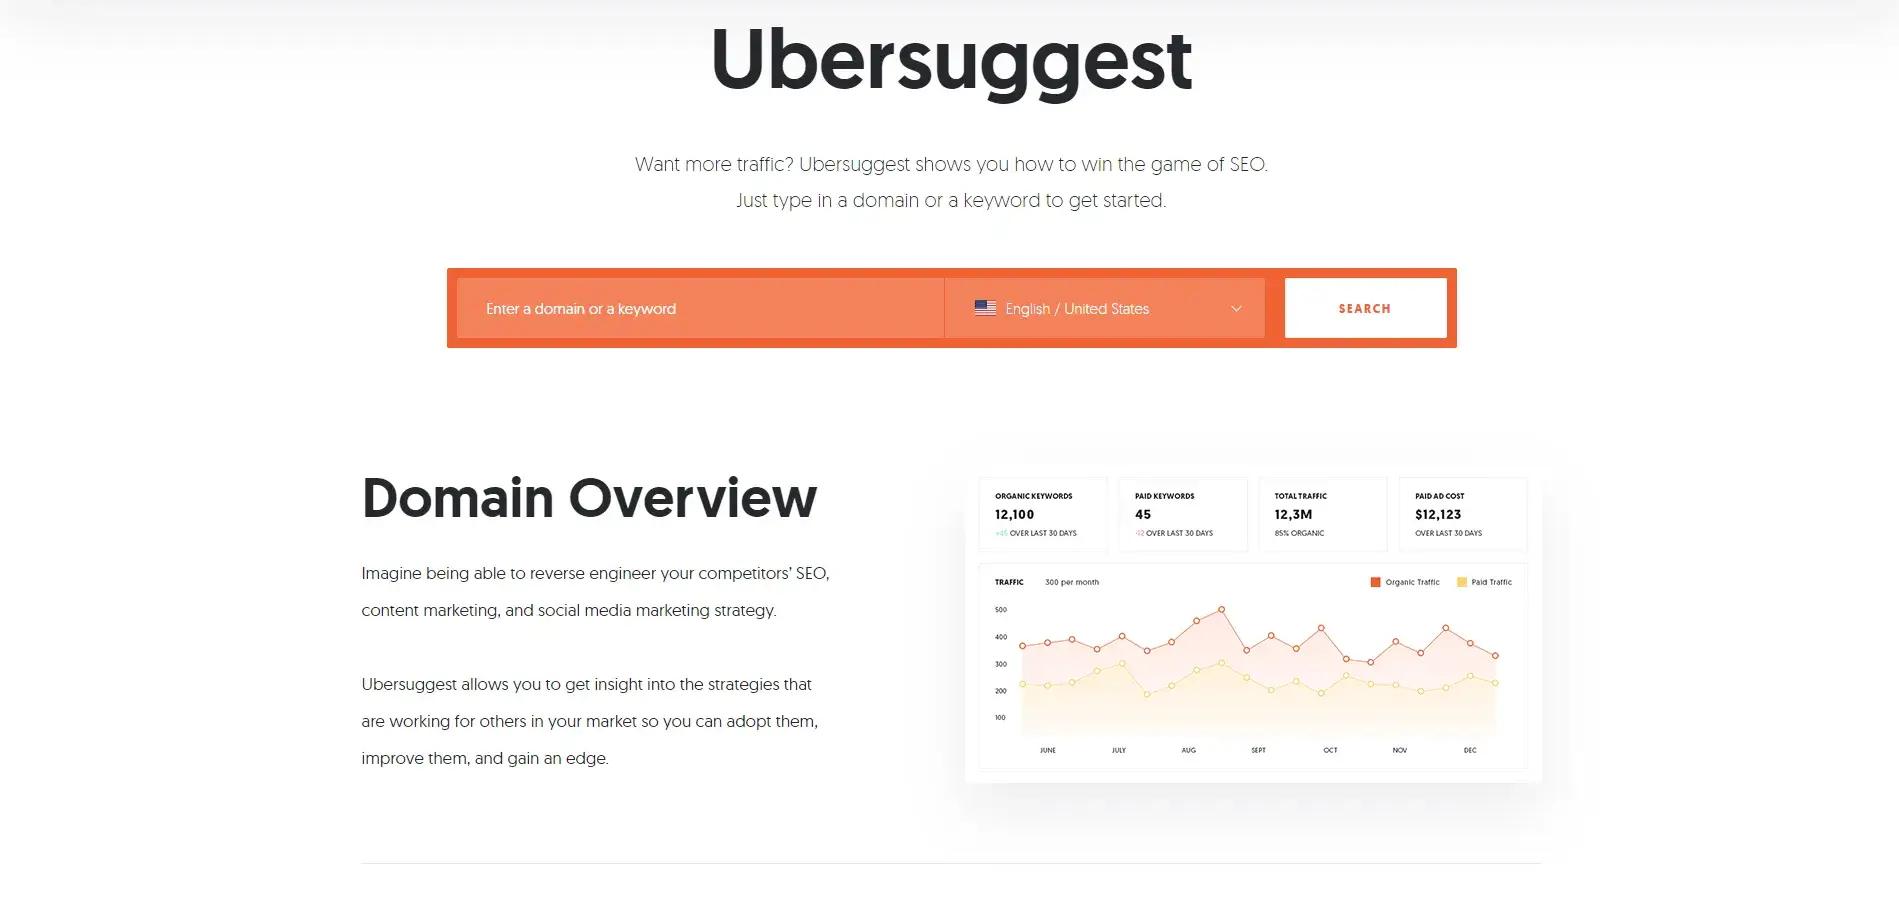 Products to Review:  Ubersuggest